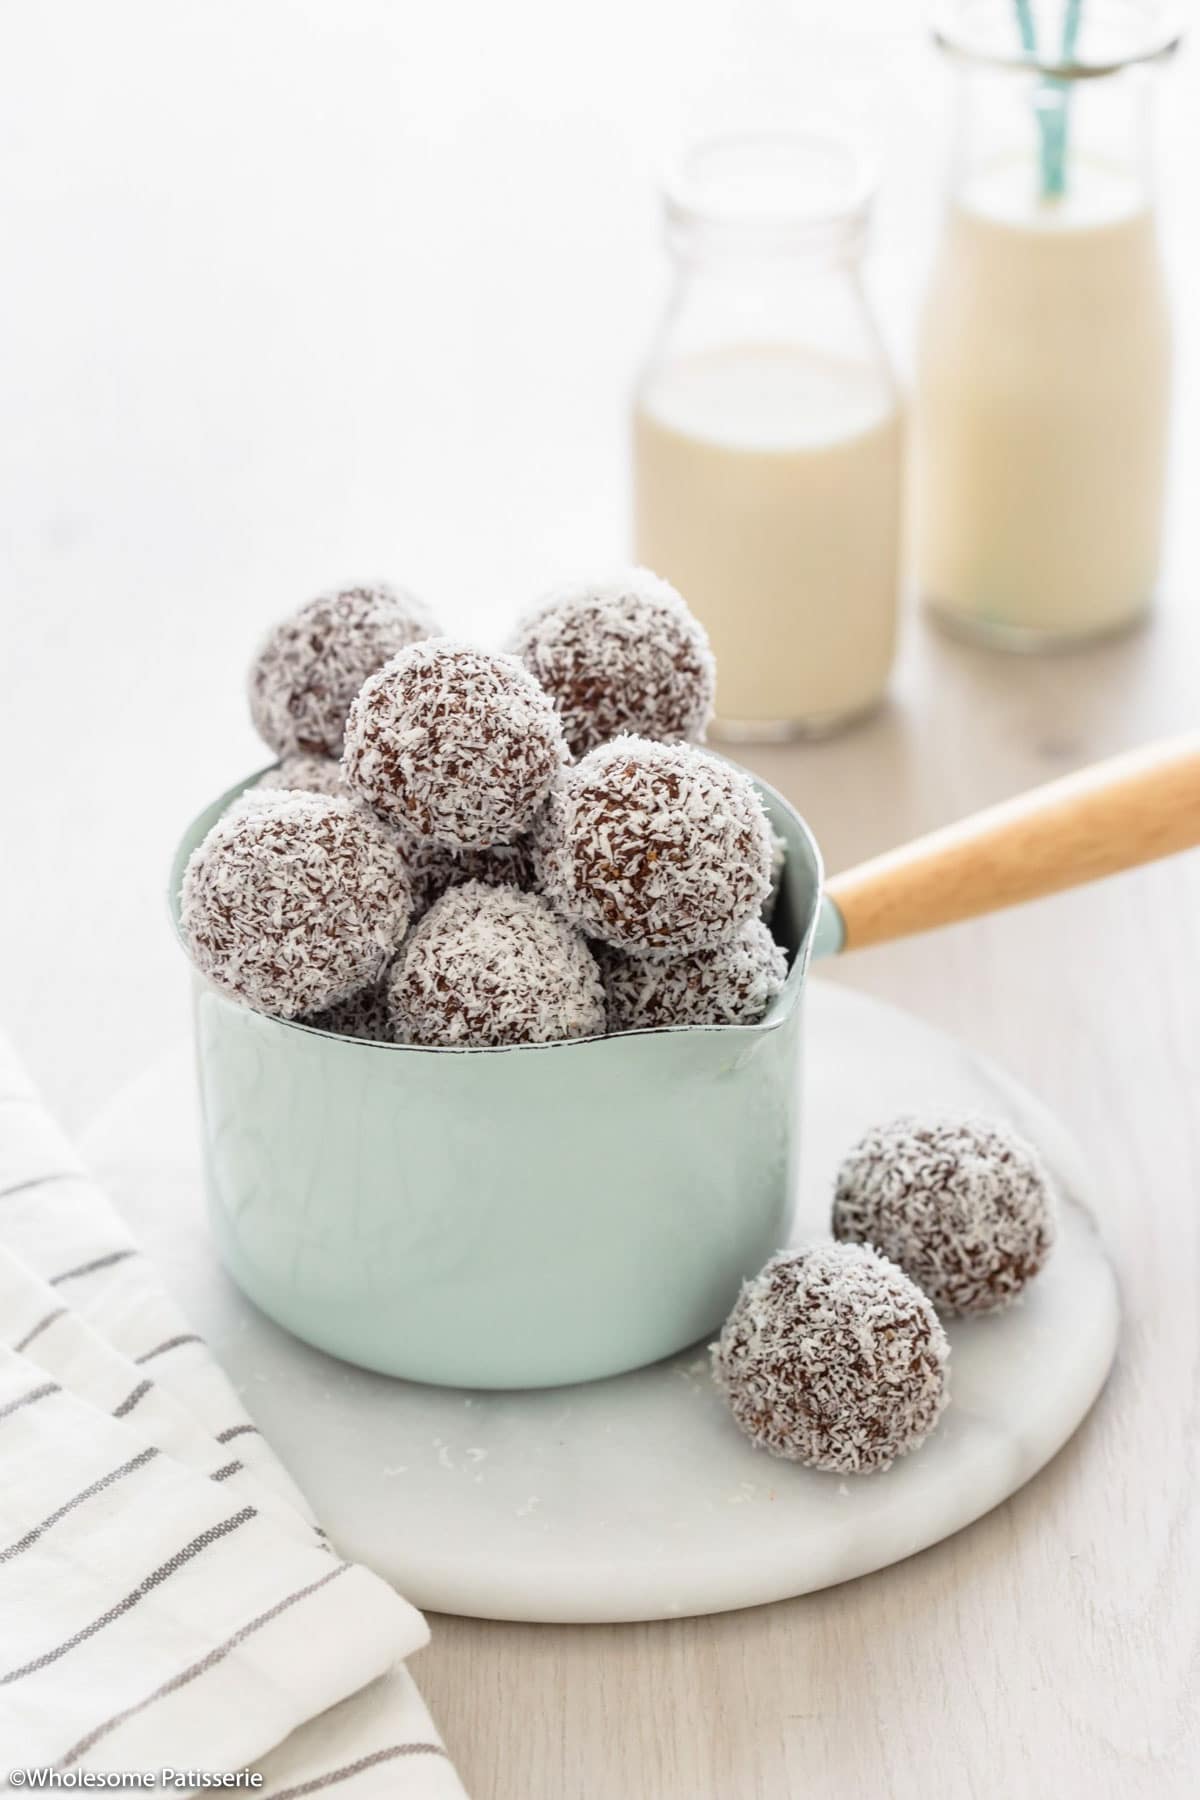 Rum balls without rum coated in coated sitting in green pot on white round platter next to striped tea towel and glasses of milk behind.